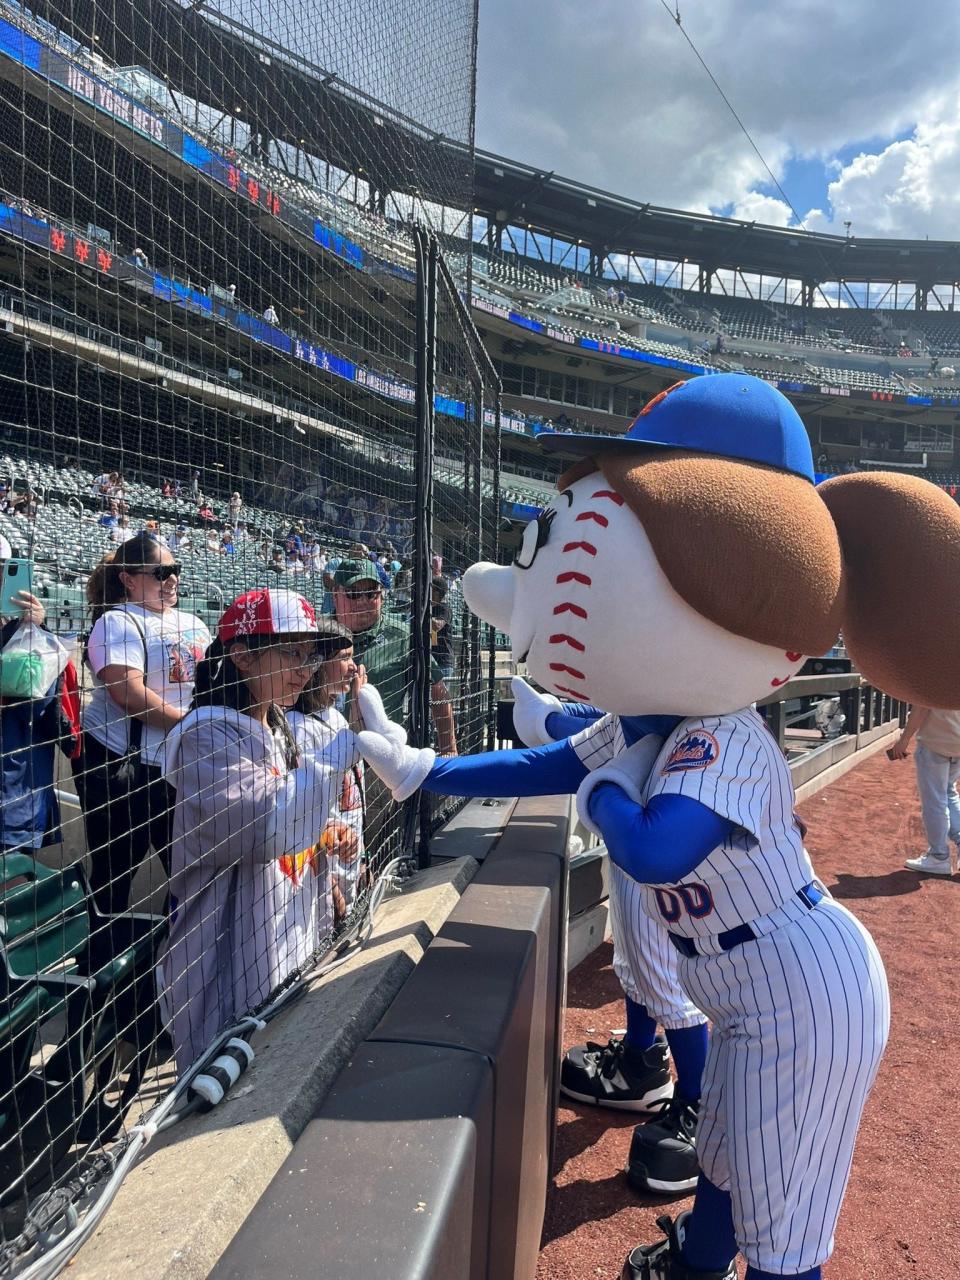 Mrs. Met greets fans before the game